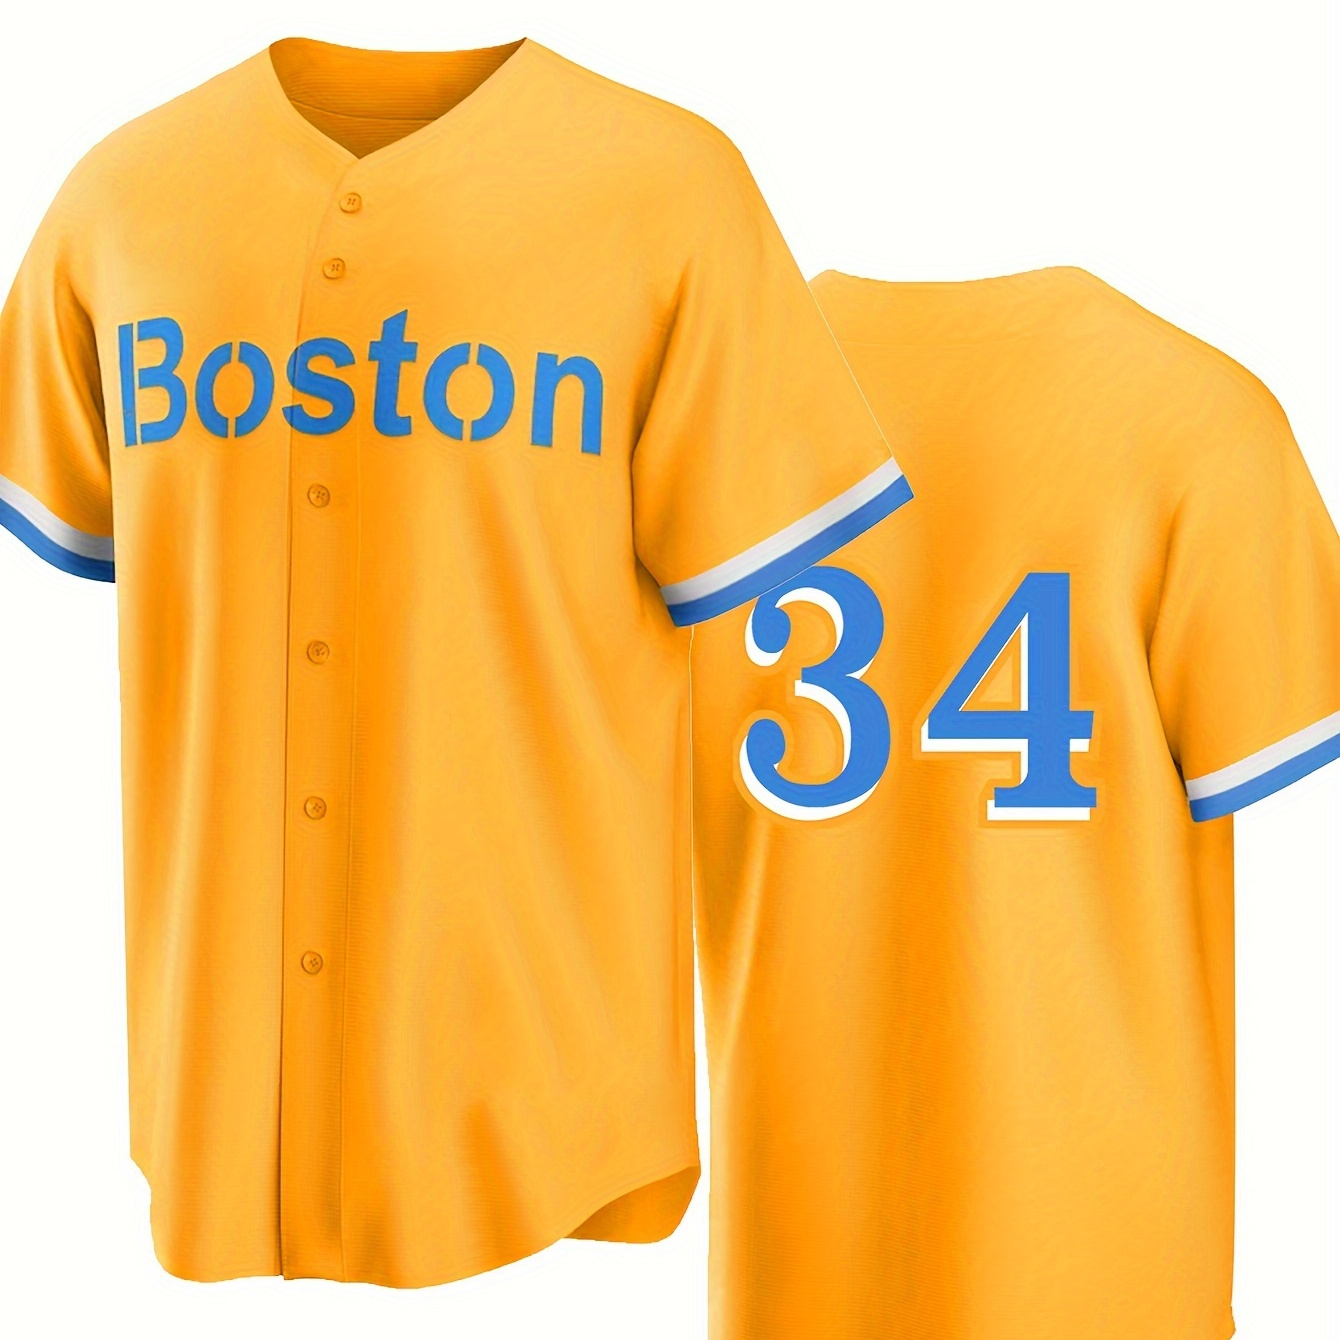 

Men's Boston #34 Yellow Baseball Shirt With Classic Letter Embroidery Design, Button Style Short Sleeved Breathable Shirt, For Training And Competition Use